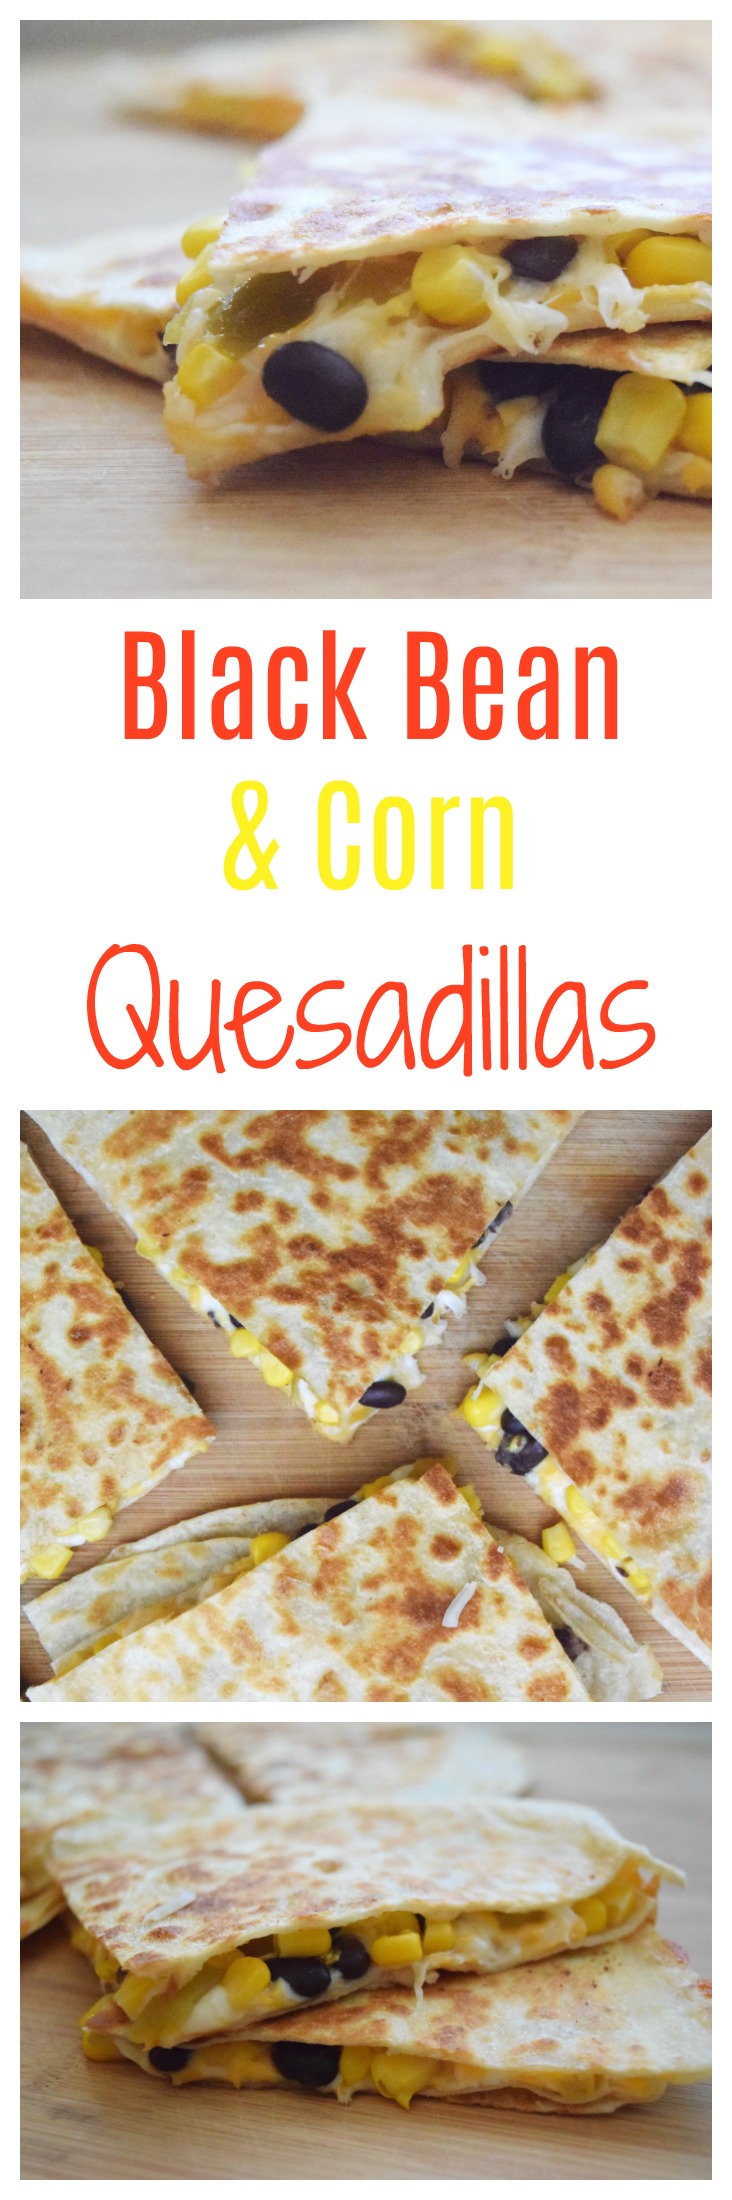 These black bean and corn quesadillas are full of flavor. They are perfect for an easy kid-friendly meal and work for Meatless Monday, too!